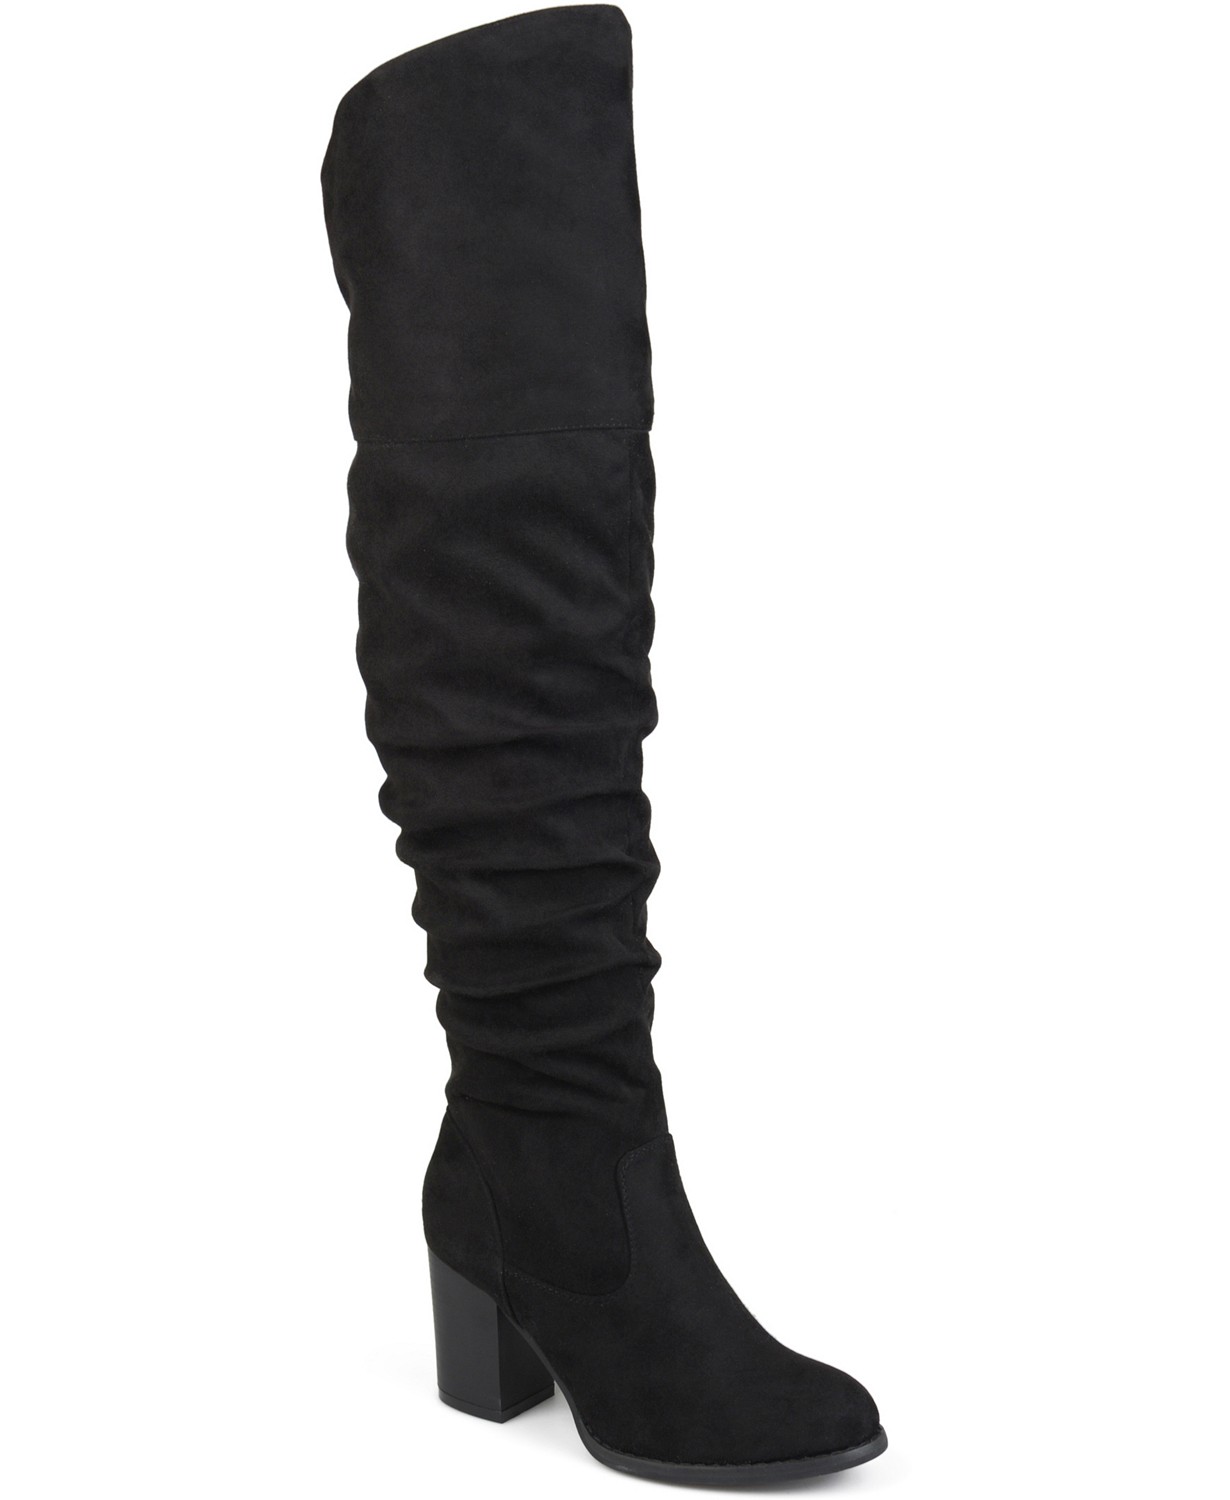 woocommerce-673321-2209615.cloudwaysapps.com-journee-collection-womens-black-extra-wide-calf-kaison-boots